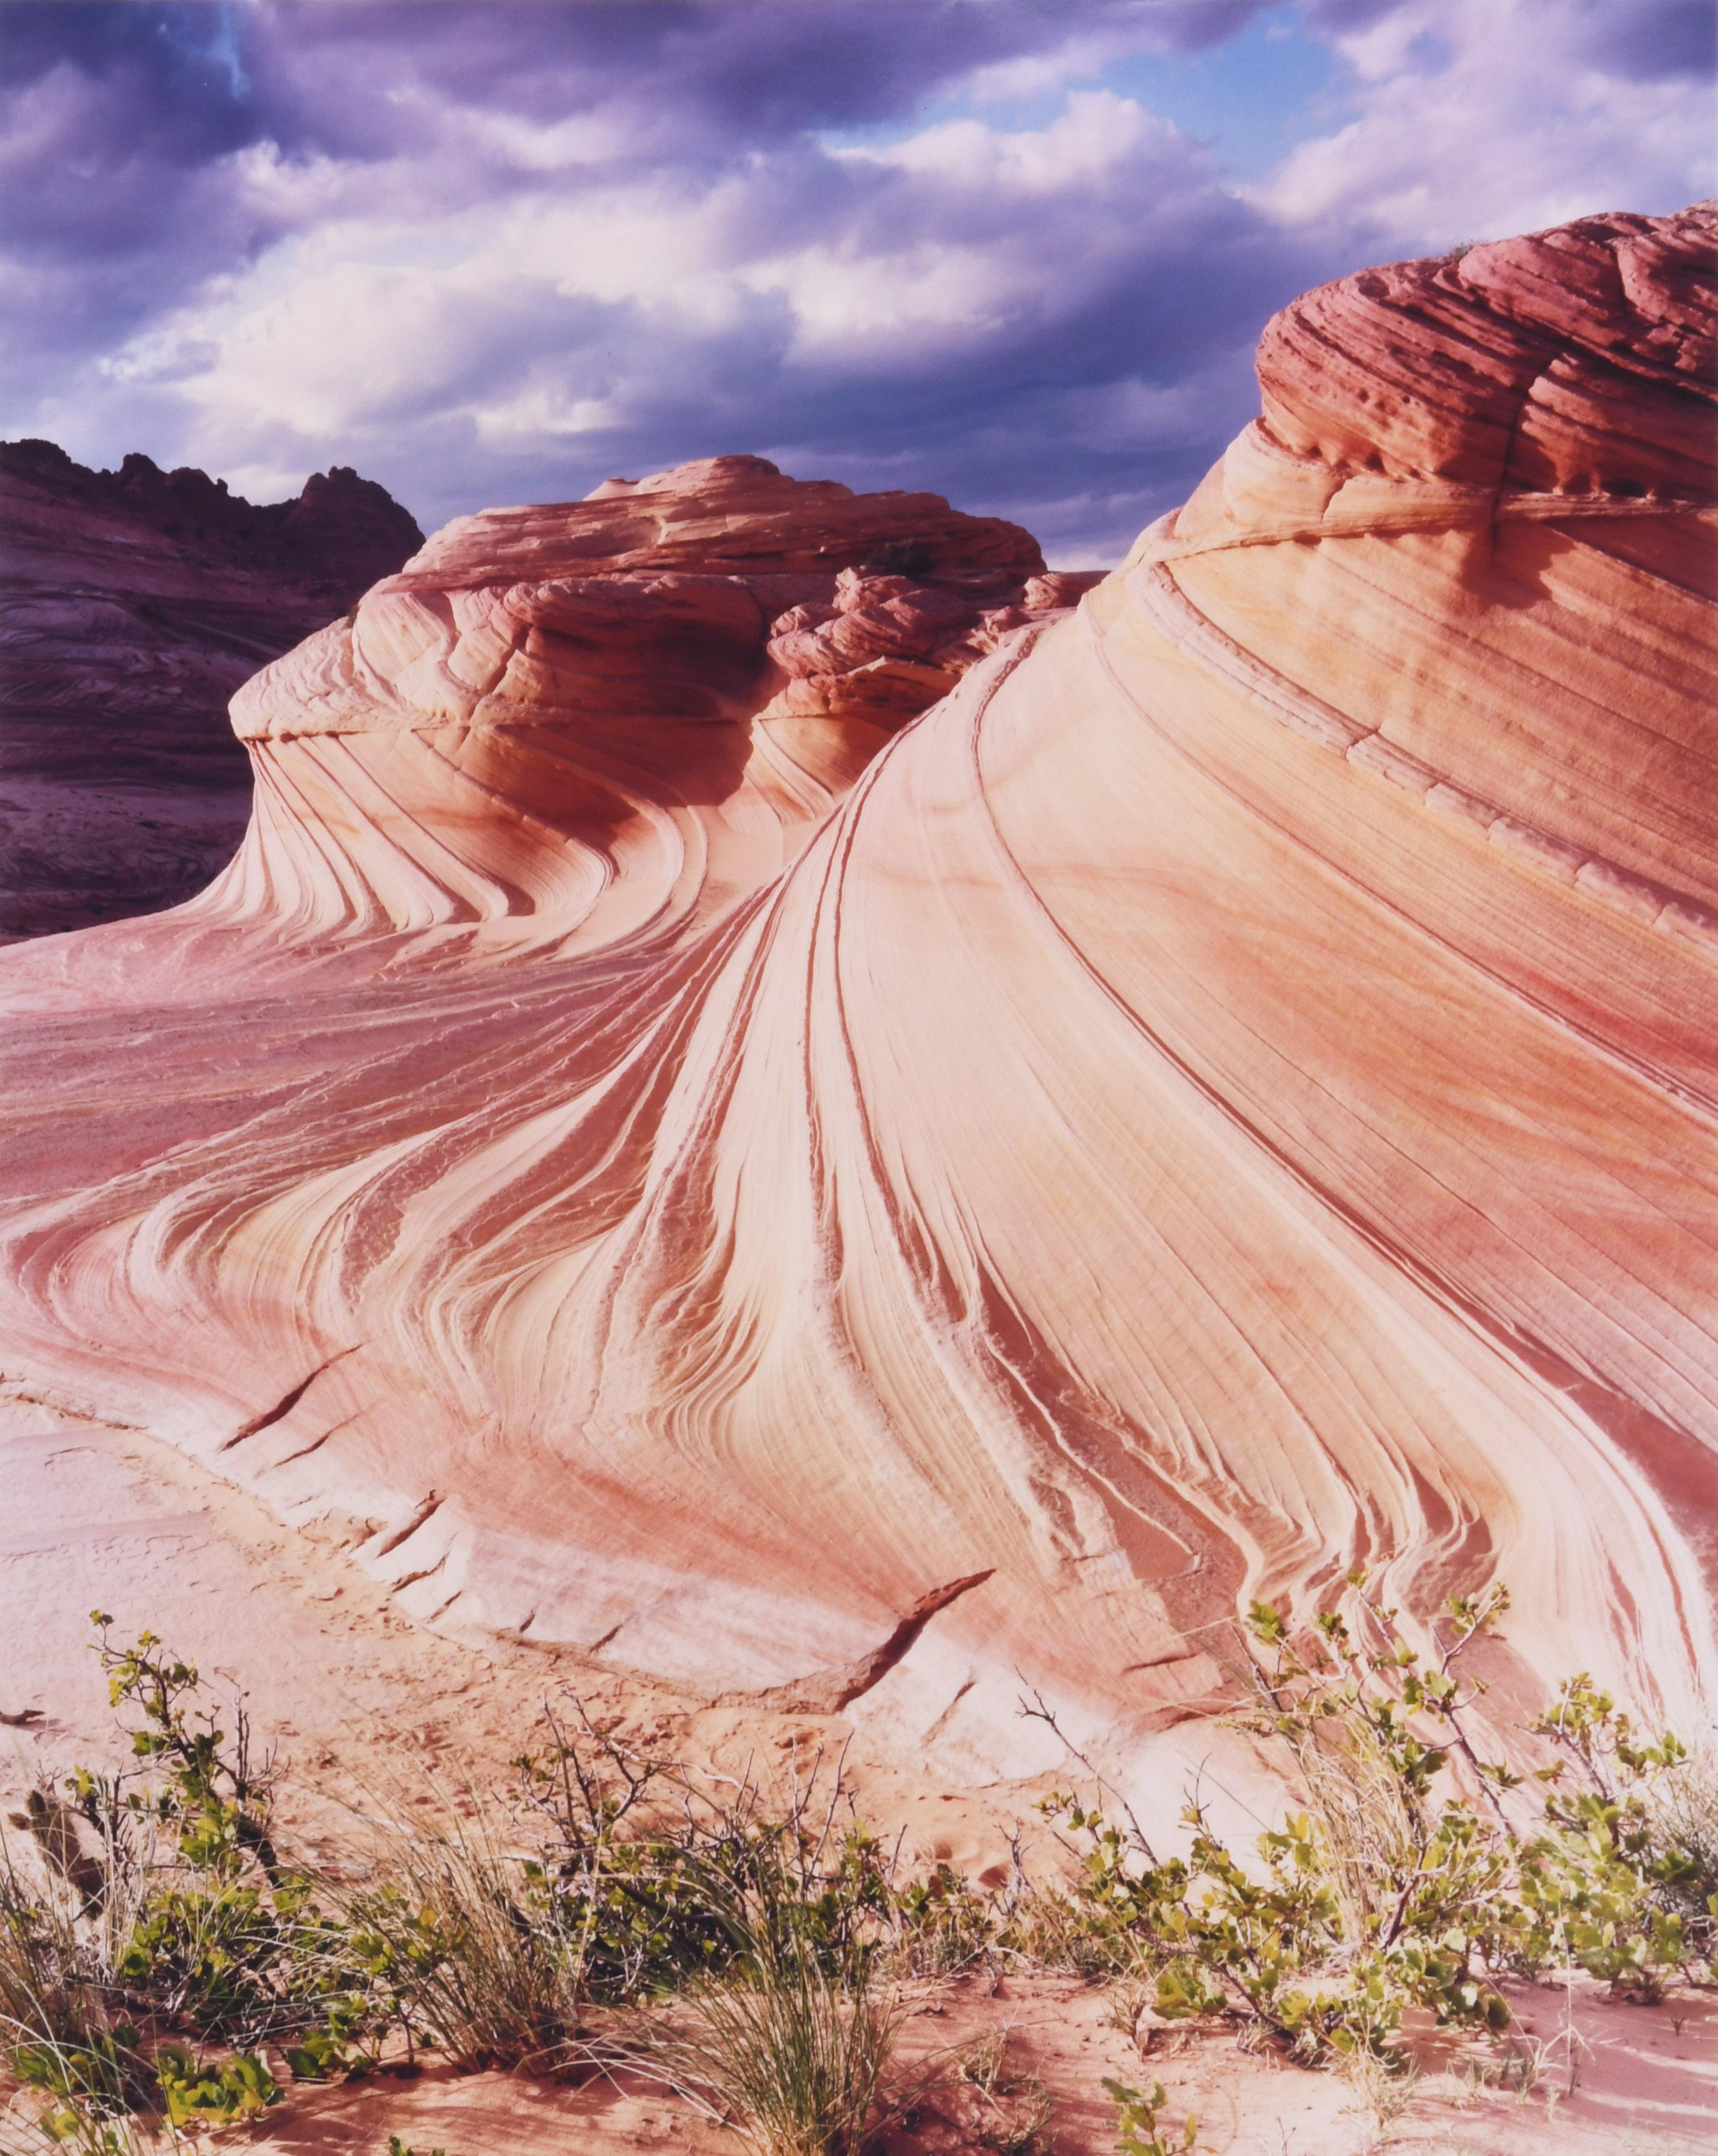 The Second Wave, Coyote Buttes, Paria Canyon-Vermilion Clifts Wilderness, AR